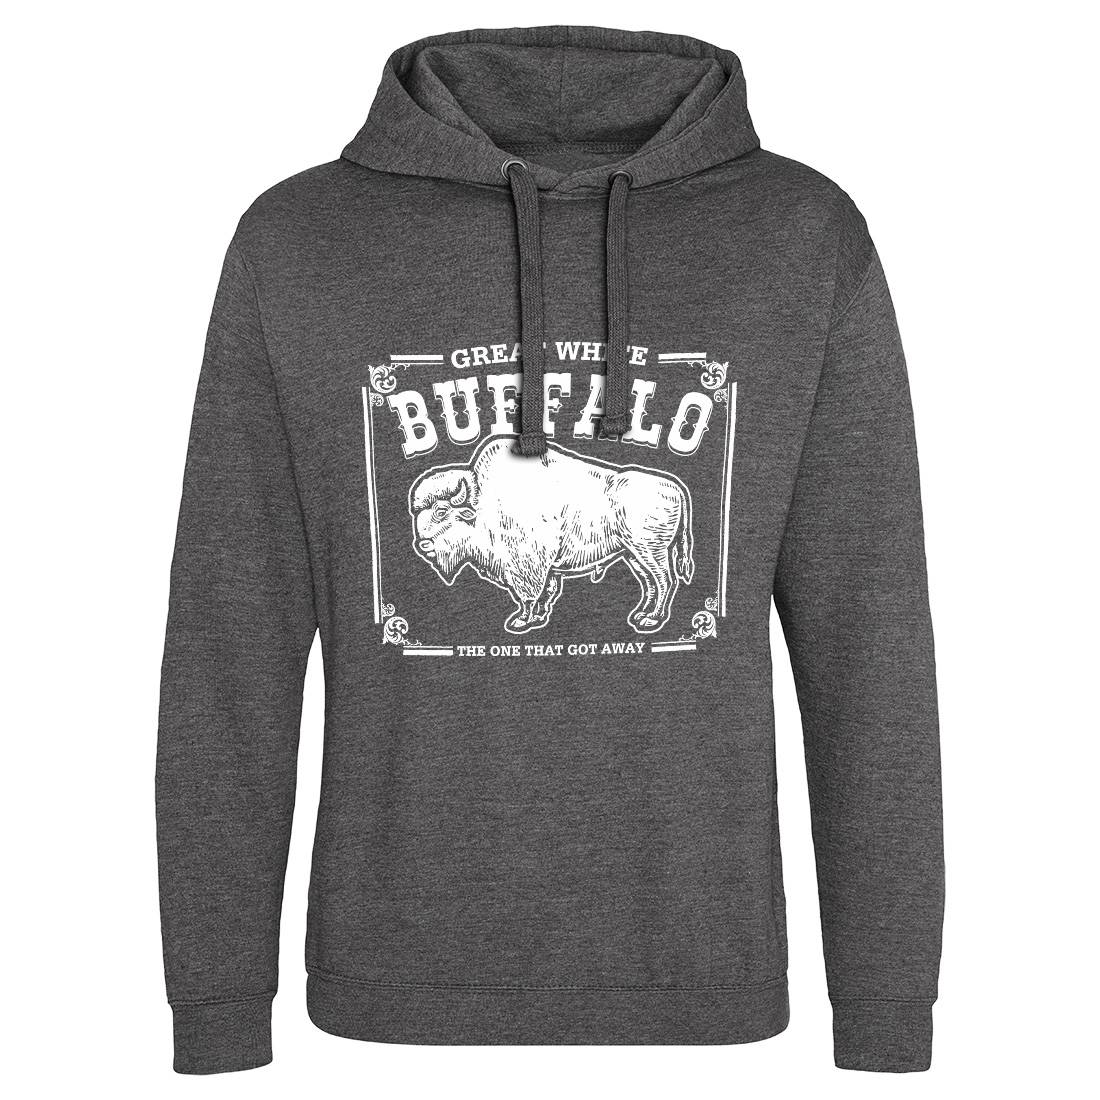 Great White Buffalo Mens Hoodie Without Pocket Animals D110